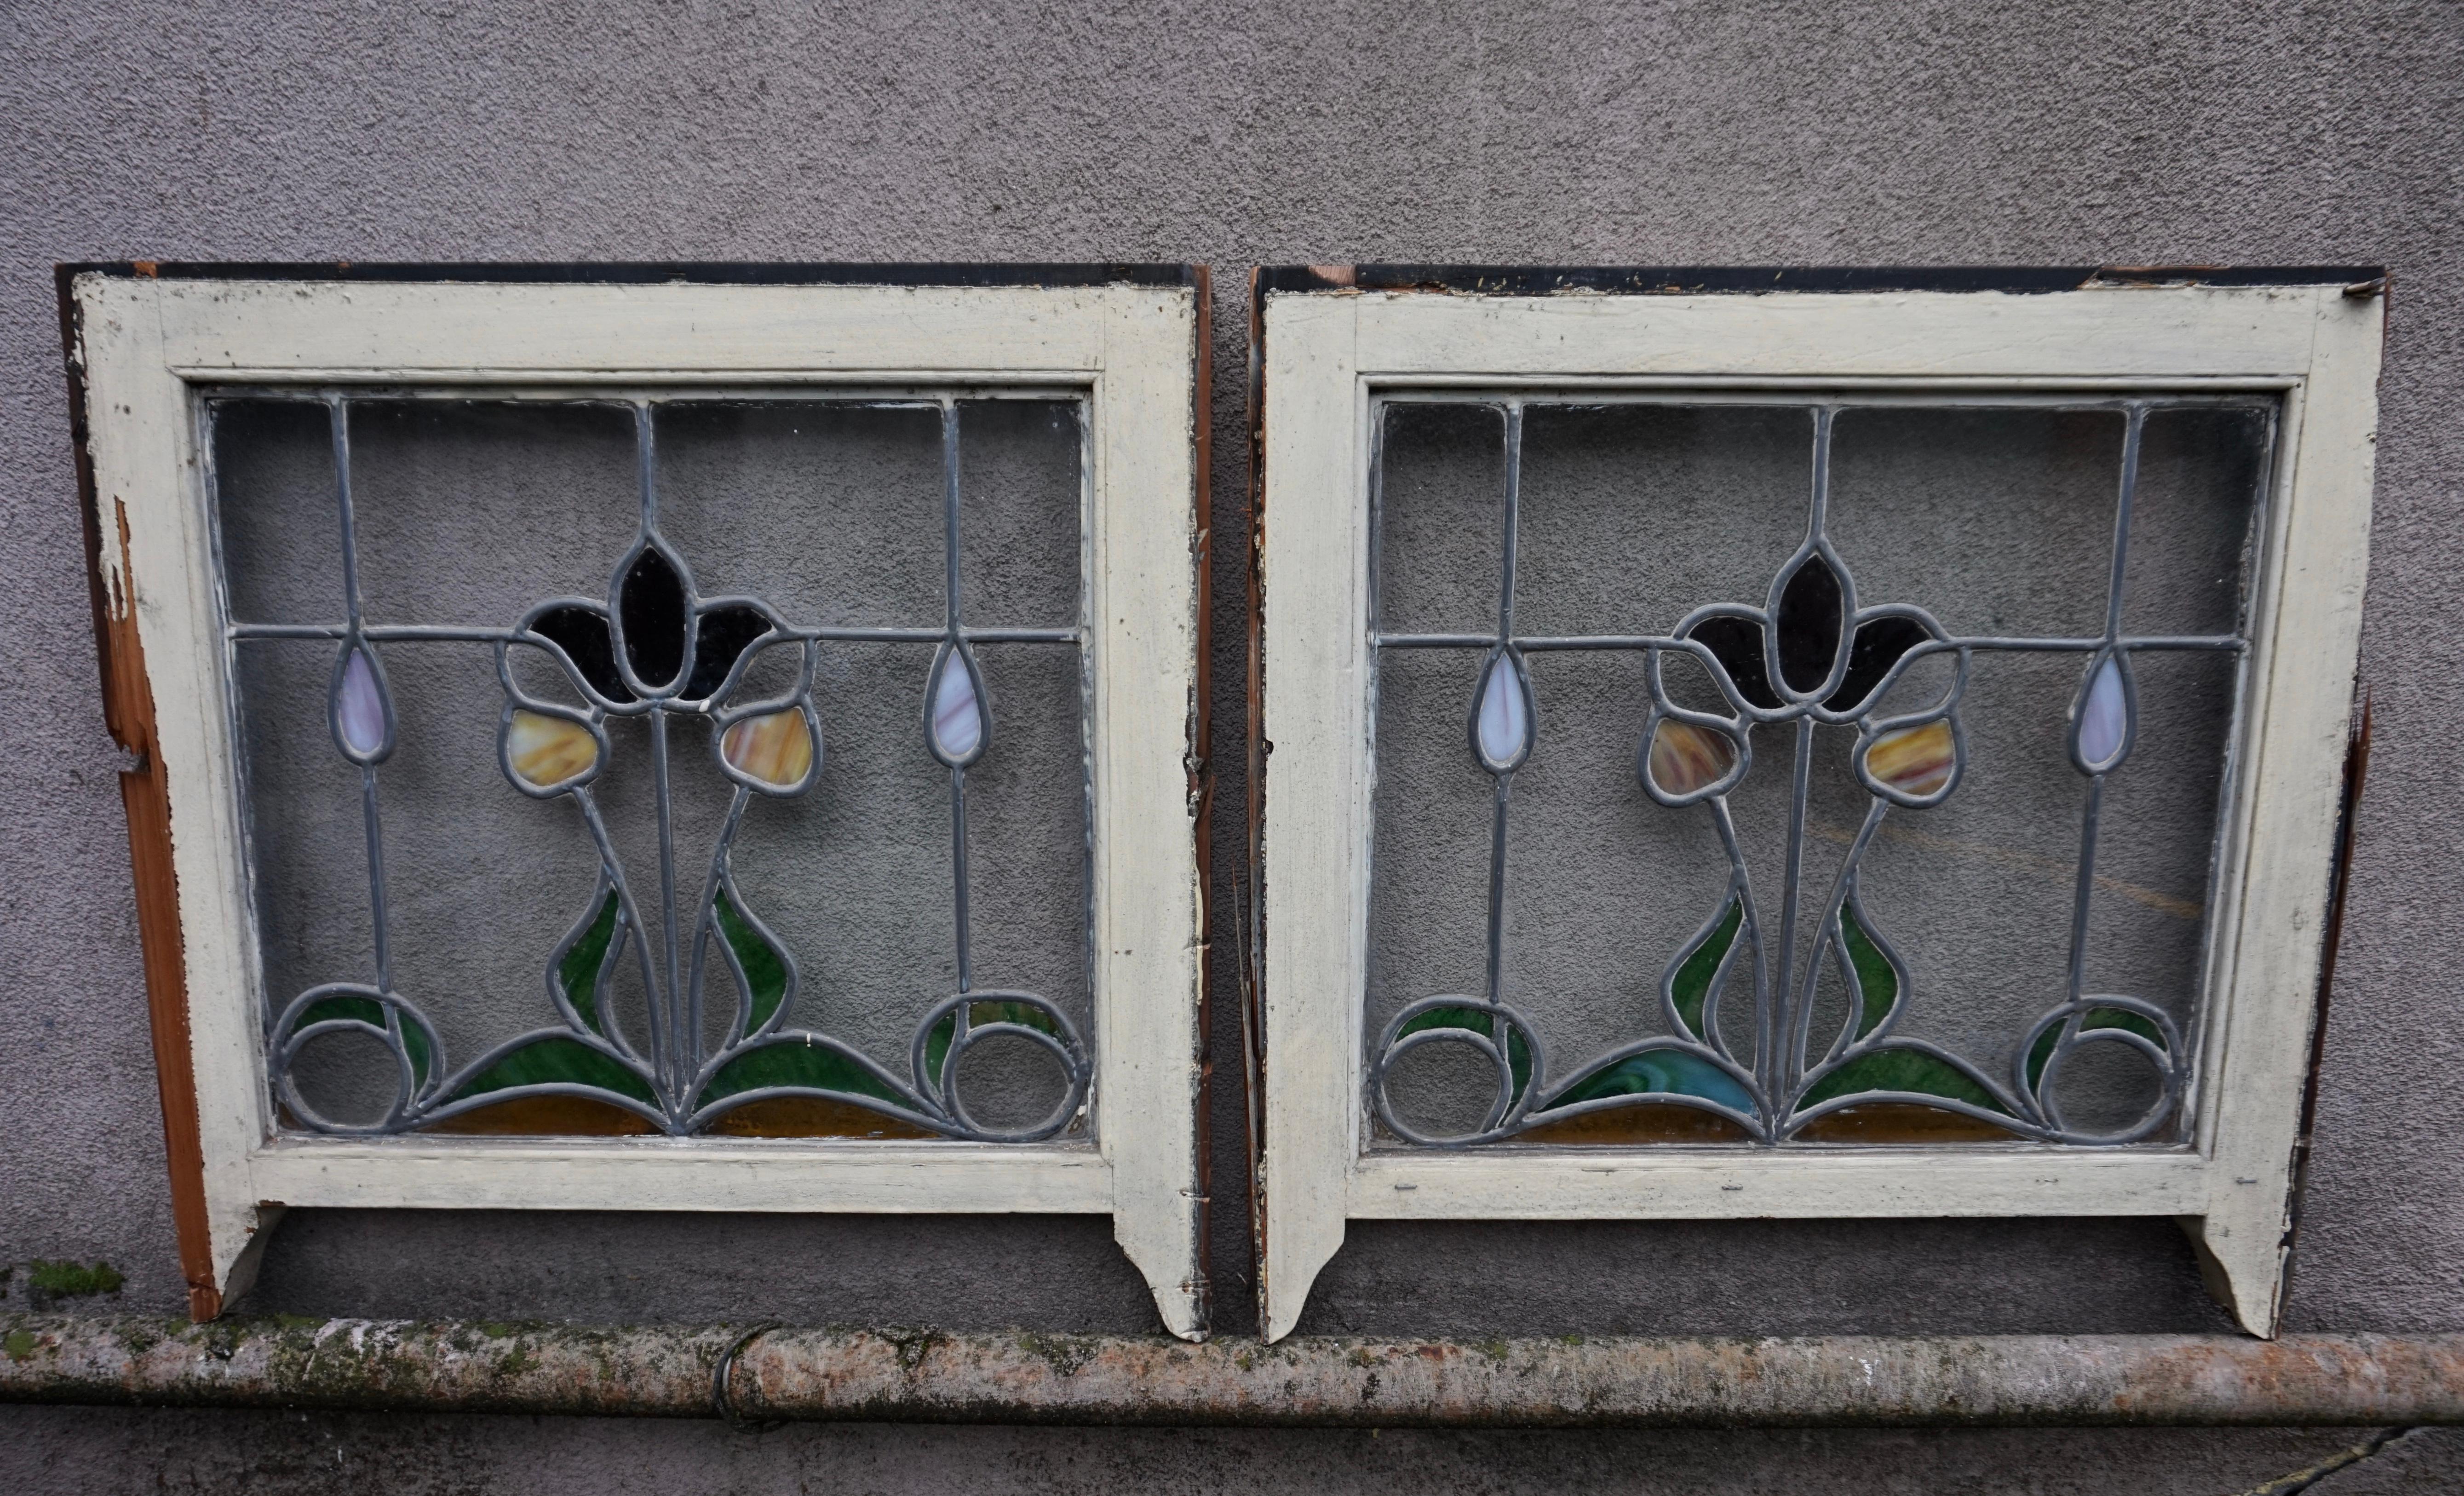 Pair Of Rare Art Nouveau Stain Glass Windows With Scrolling Tulip & Bud Motif For Sale 4